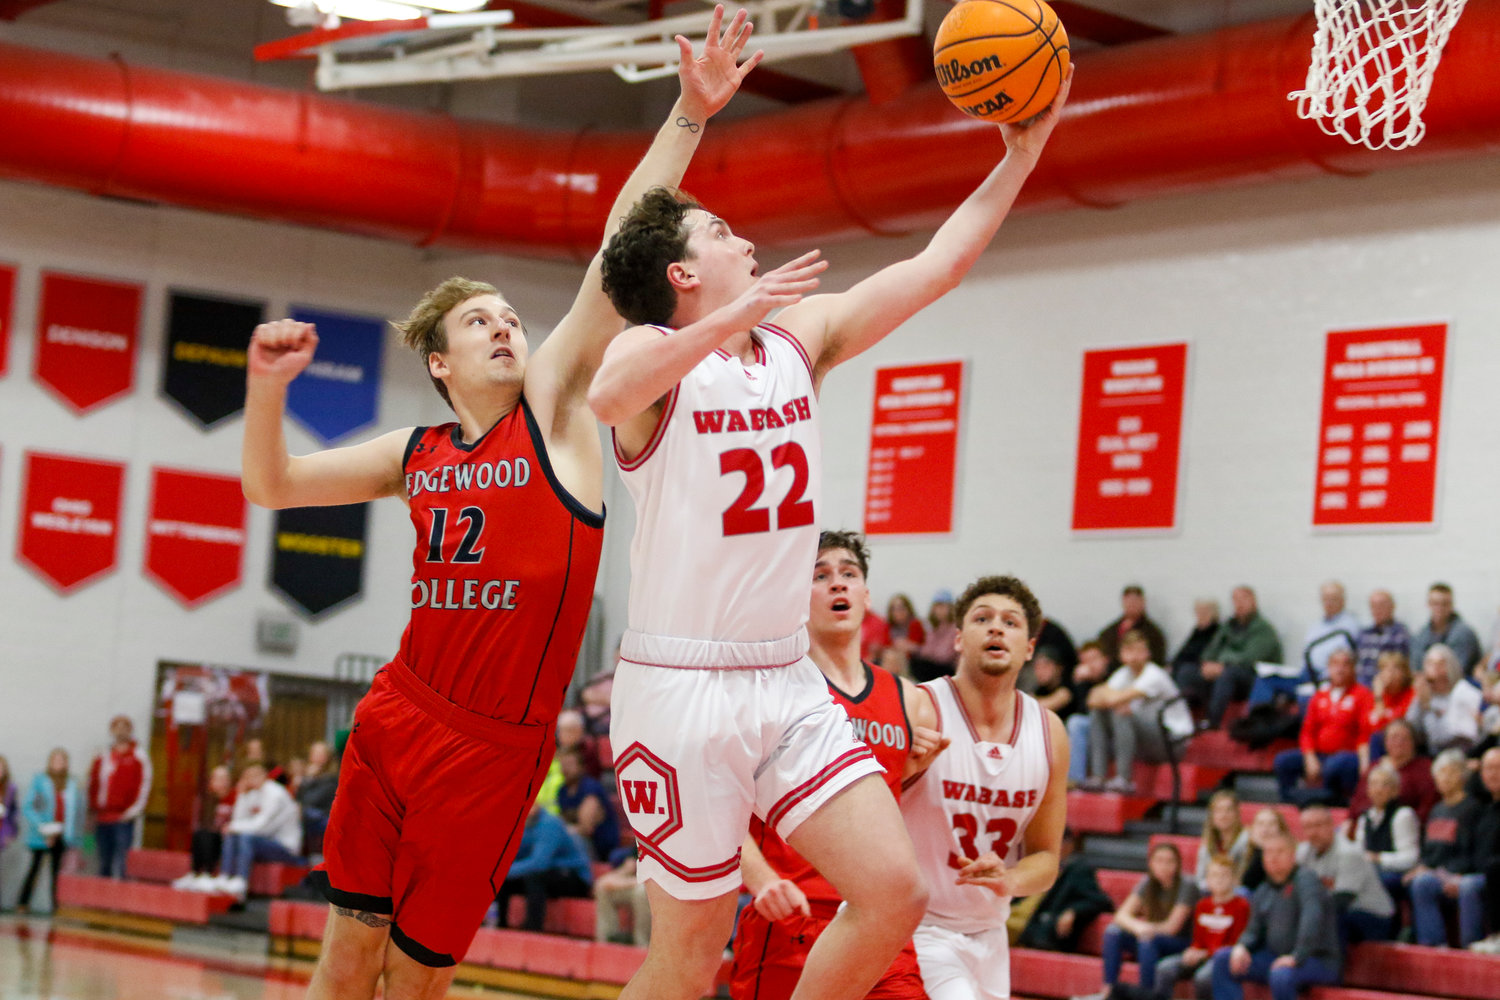 Junior guard Avery Beaver had his best scoring game of the season for the Little Giants as he scored 18 points to help Wabash defeat Edgewood 90-63.